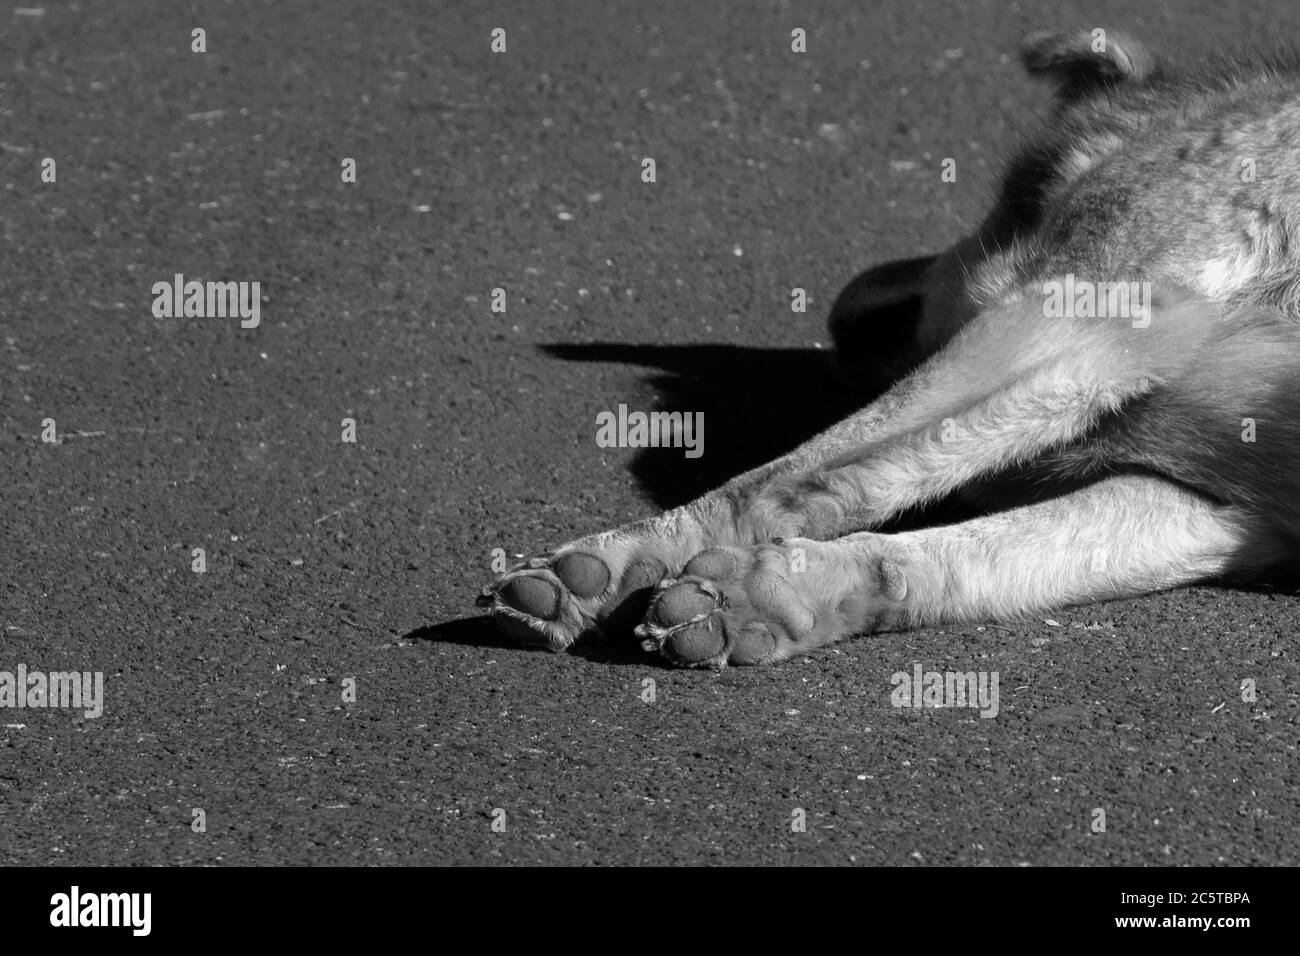 Black and white street photo of Dog's paws with blurred face Stock Photo